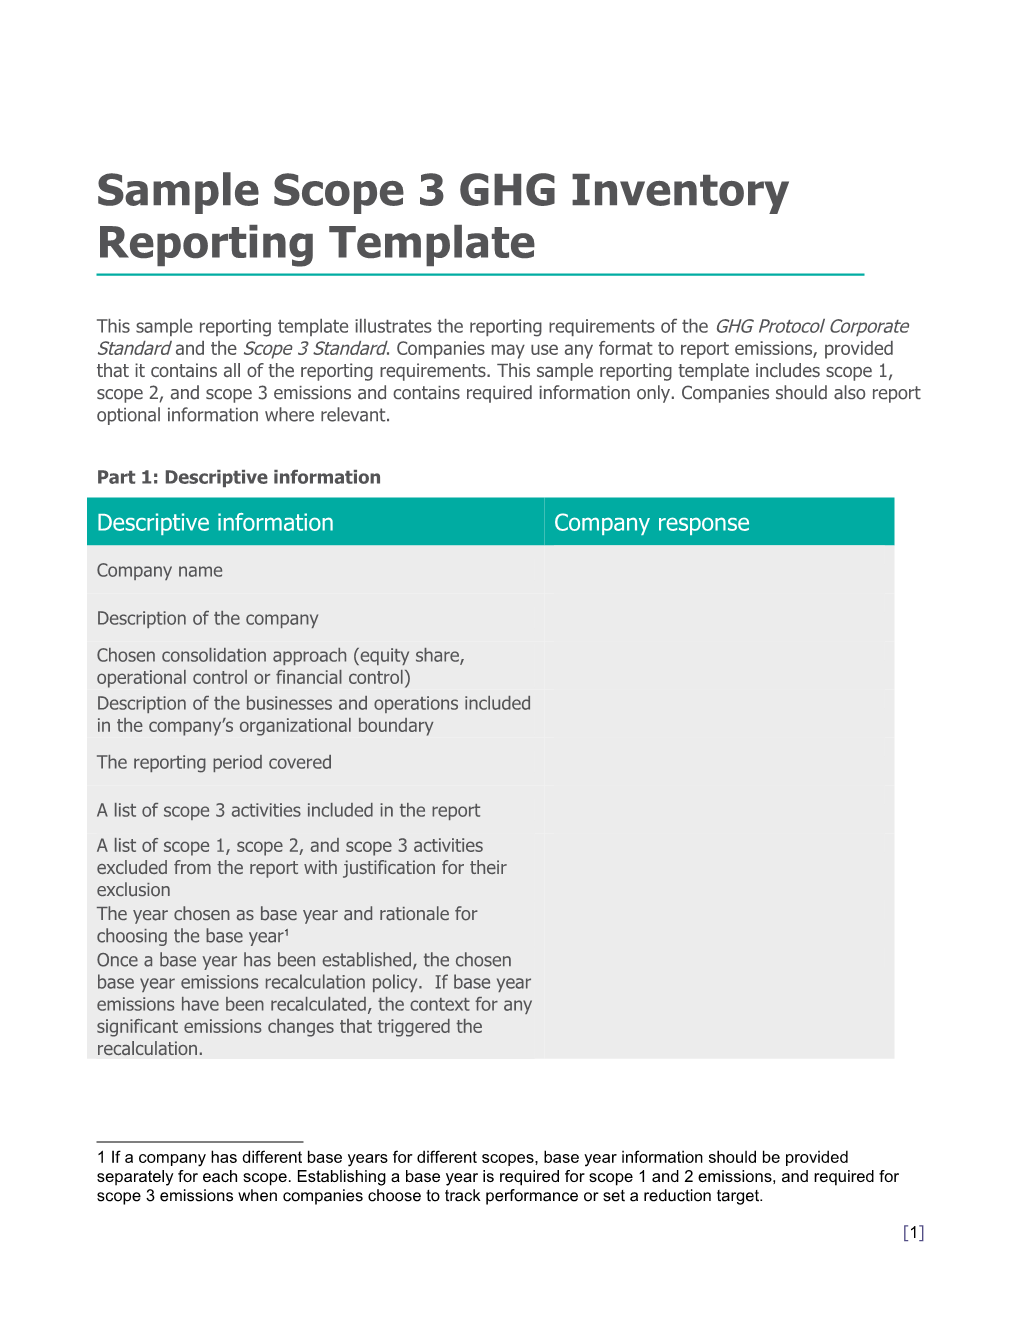 Sample Scope 3 GHG Inventory Reporting Template